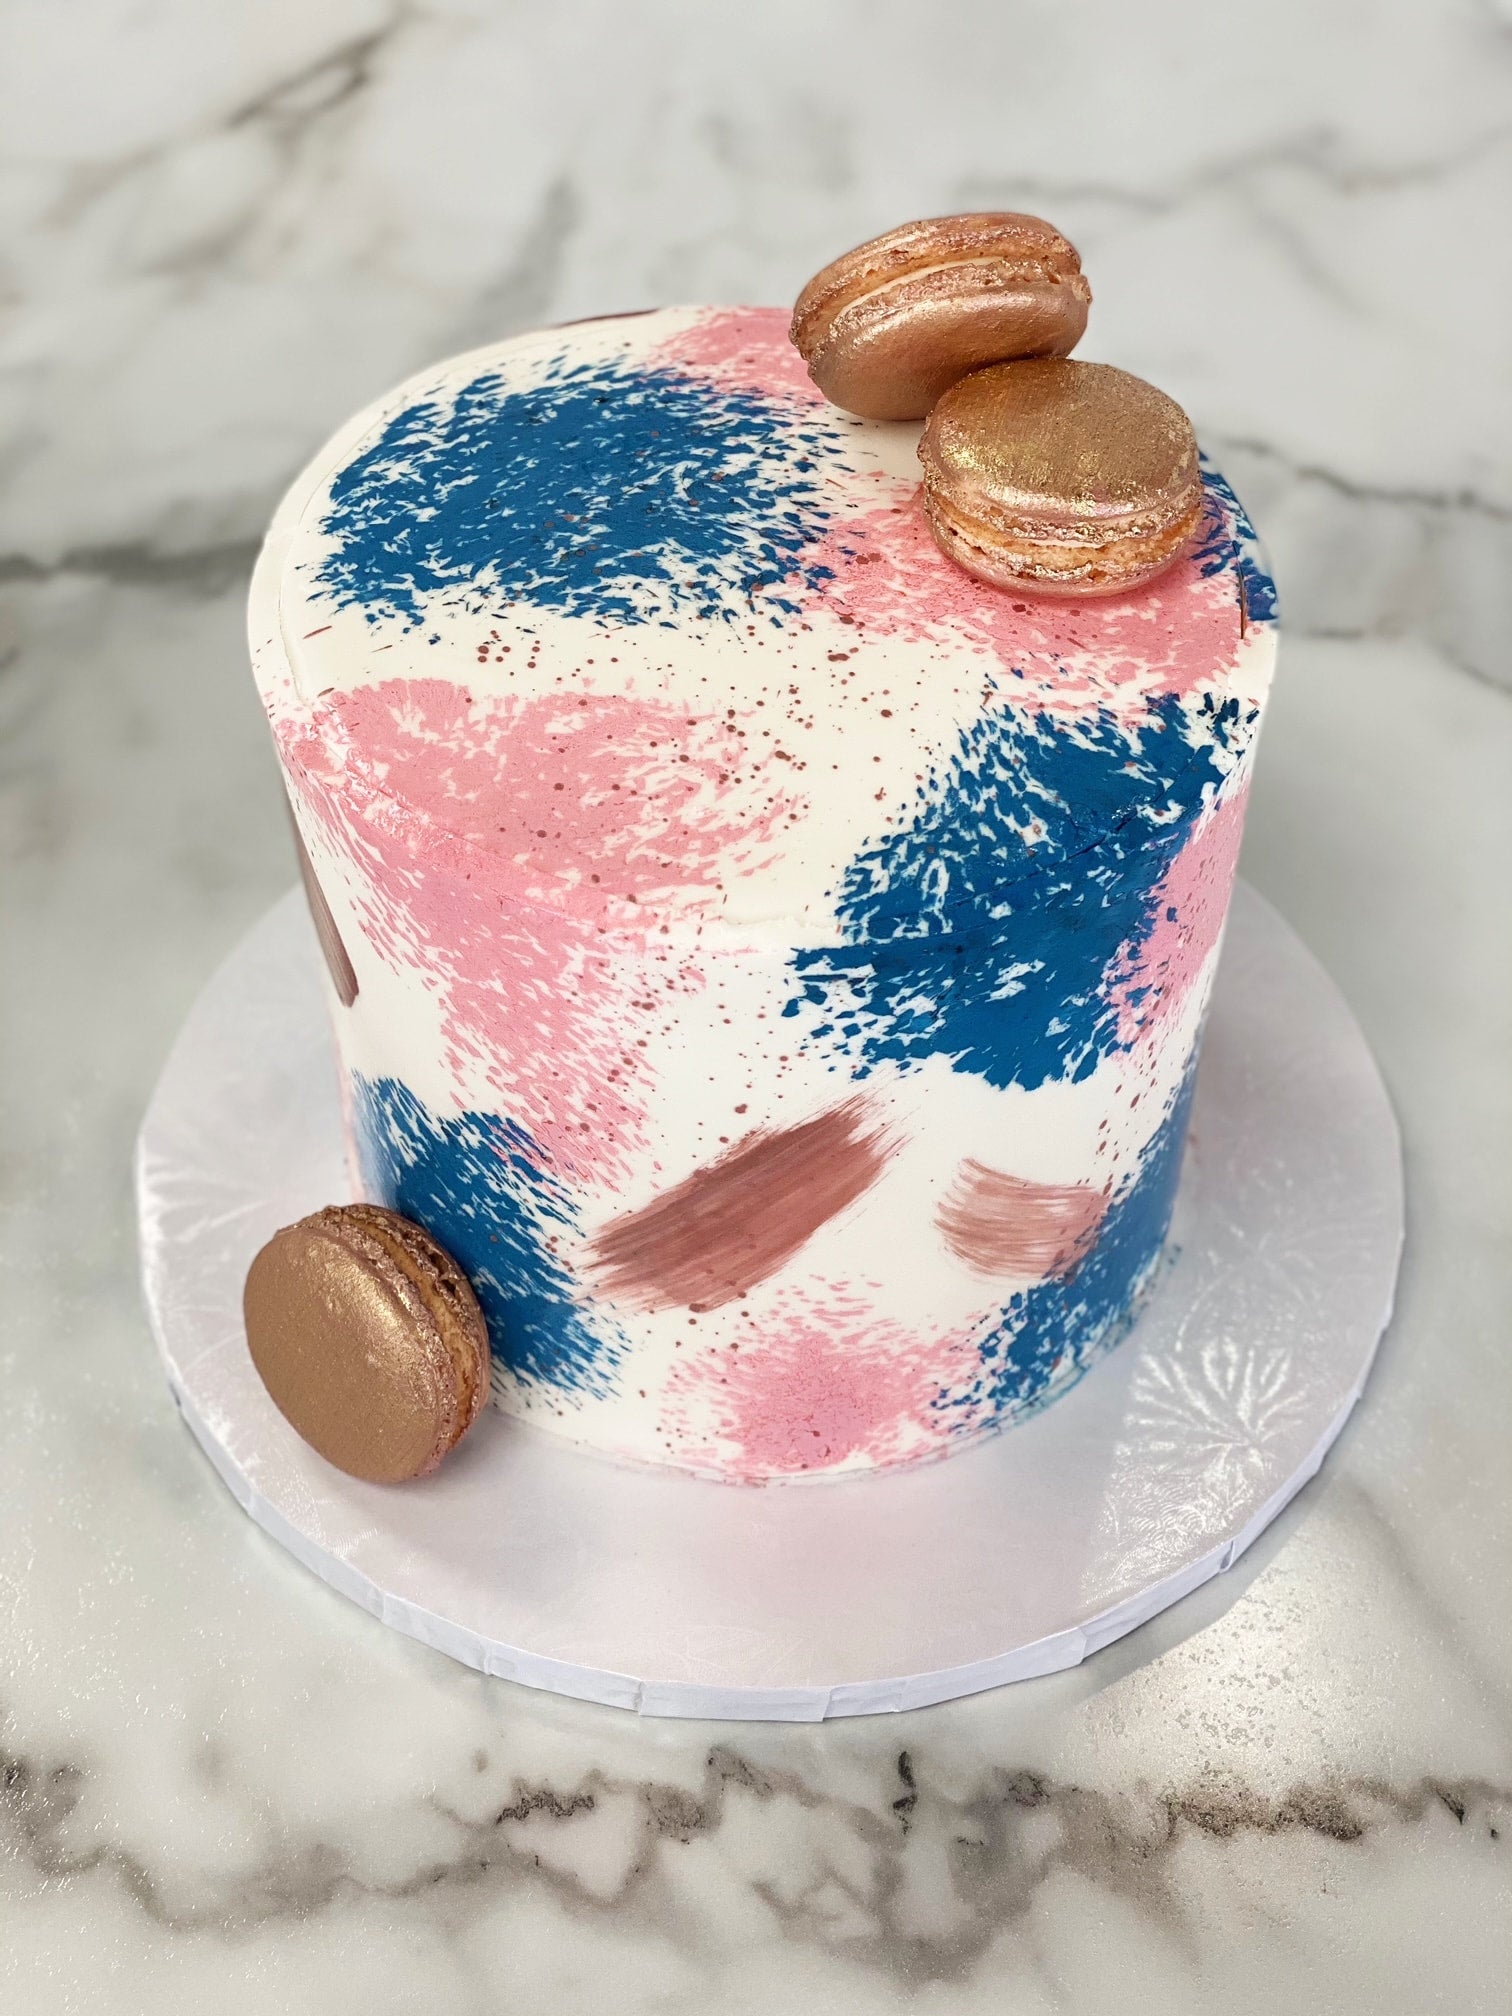 41 Cute and Fun Gender Reveal Cake Ideas - StayGlam